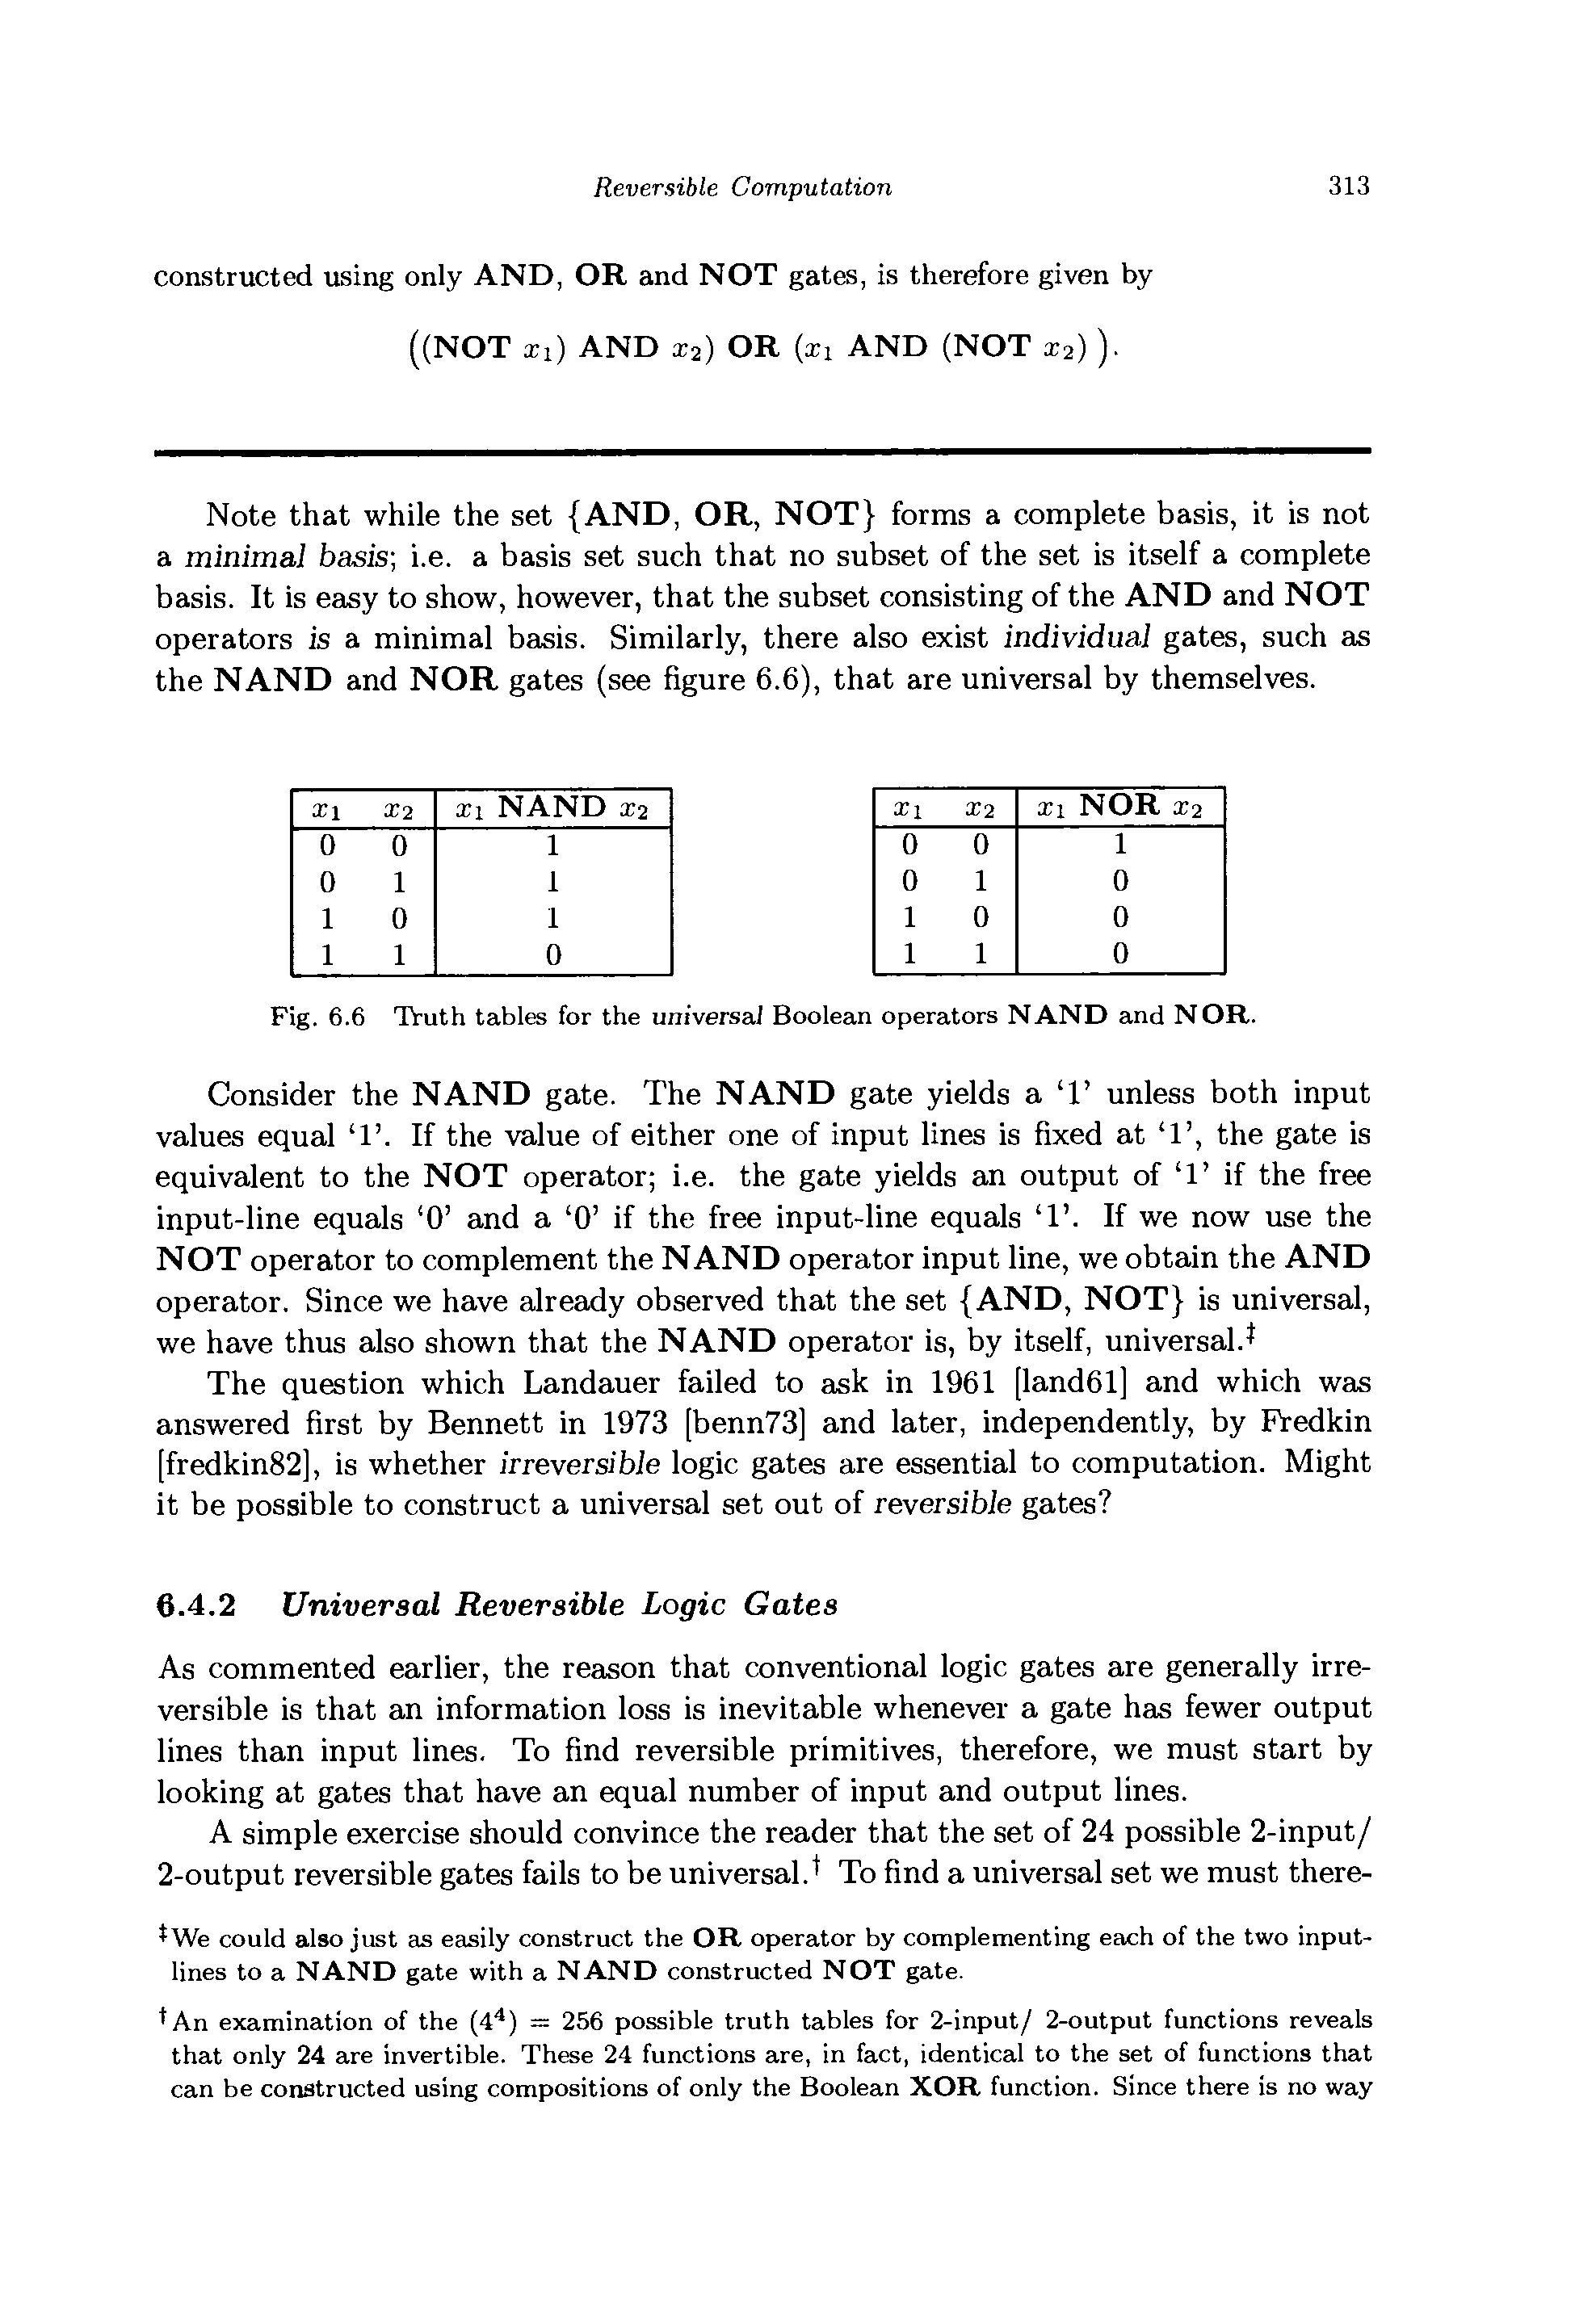 Fig. 6.6 TVuth tables for the universal Boolean operators NAND and NOR.